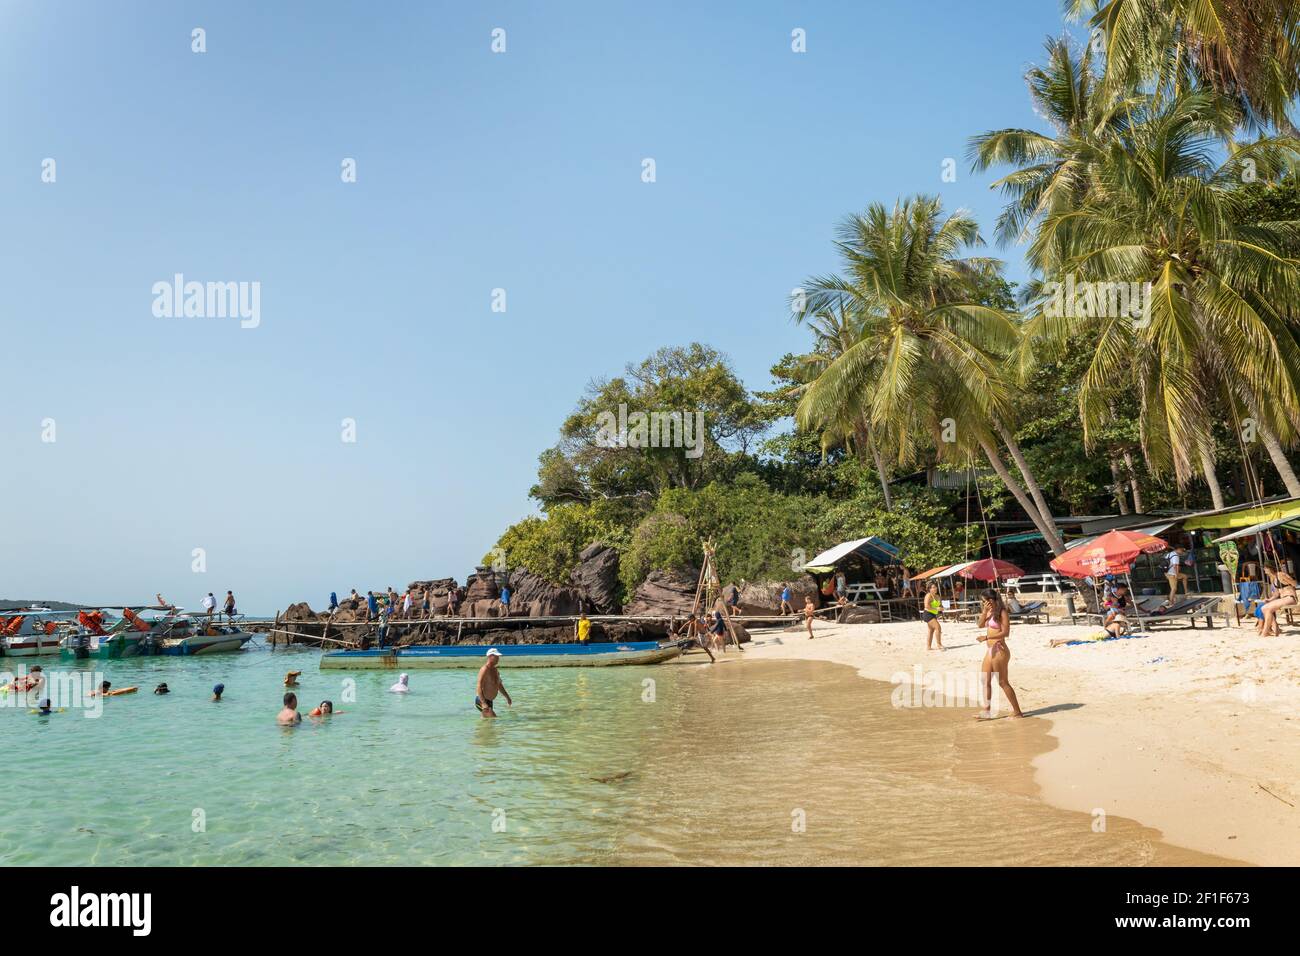 Tourists arrived by boats enjoying their day on the Fingernail island (vietnamese: Hon Mong Tay), An Thoi archipelago, Vietnam Stock Photo